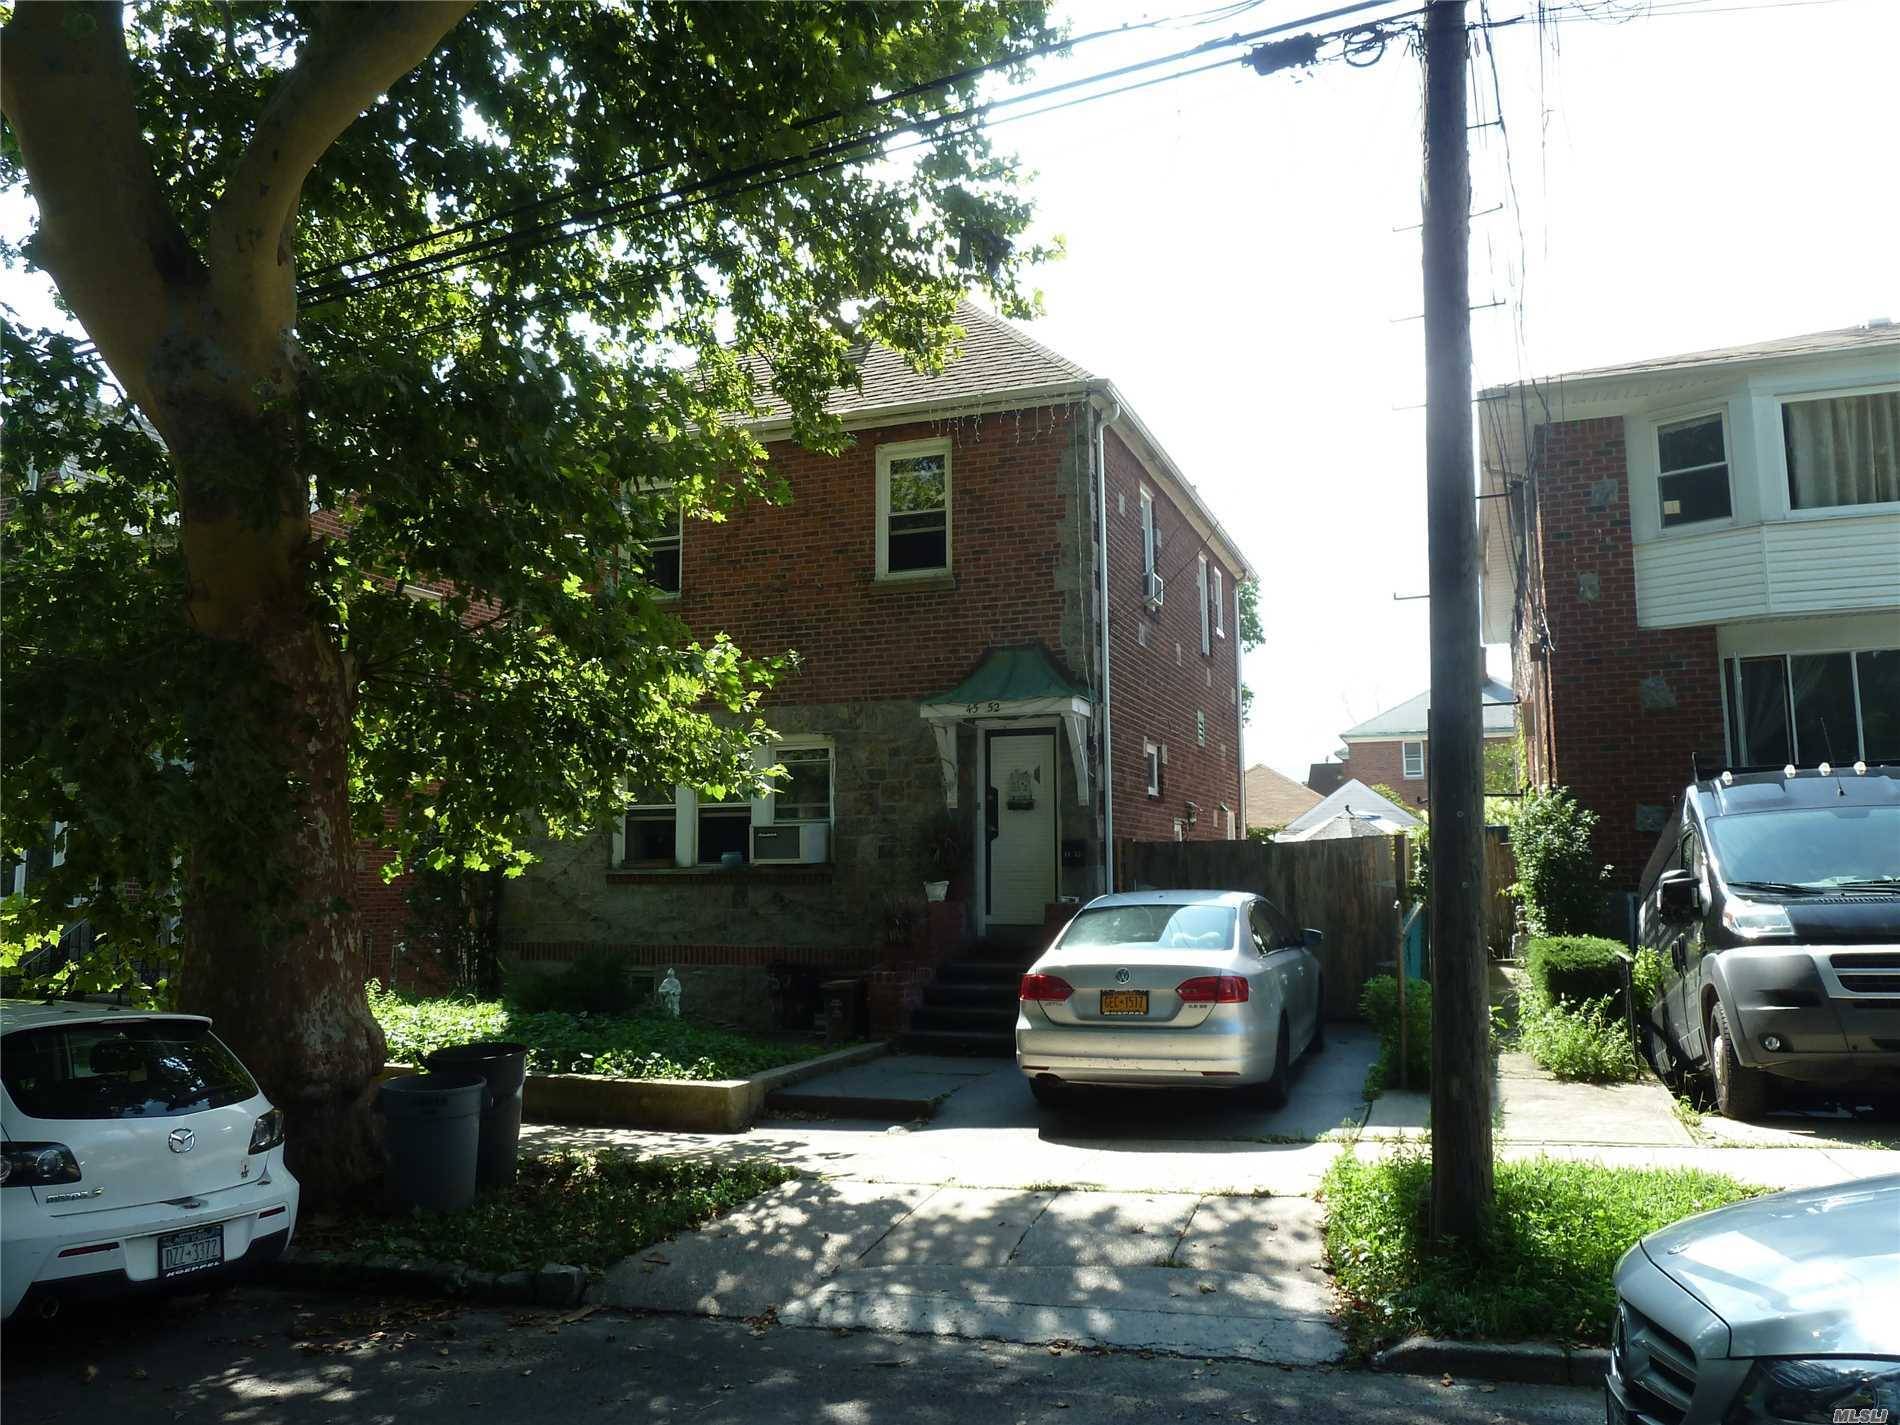 Colonial House Situated In R4-1 Zoning In The Heart Of Flushing.